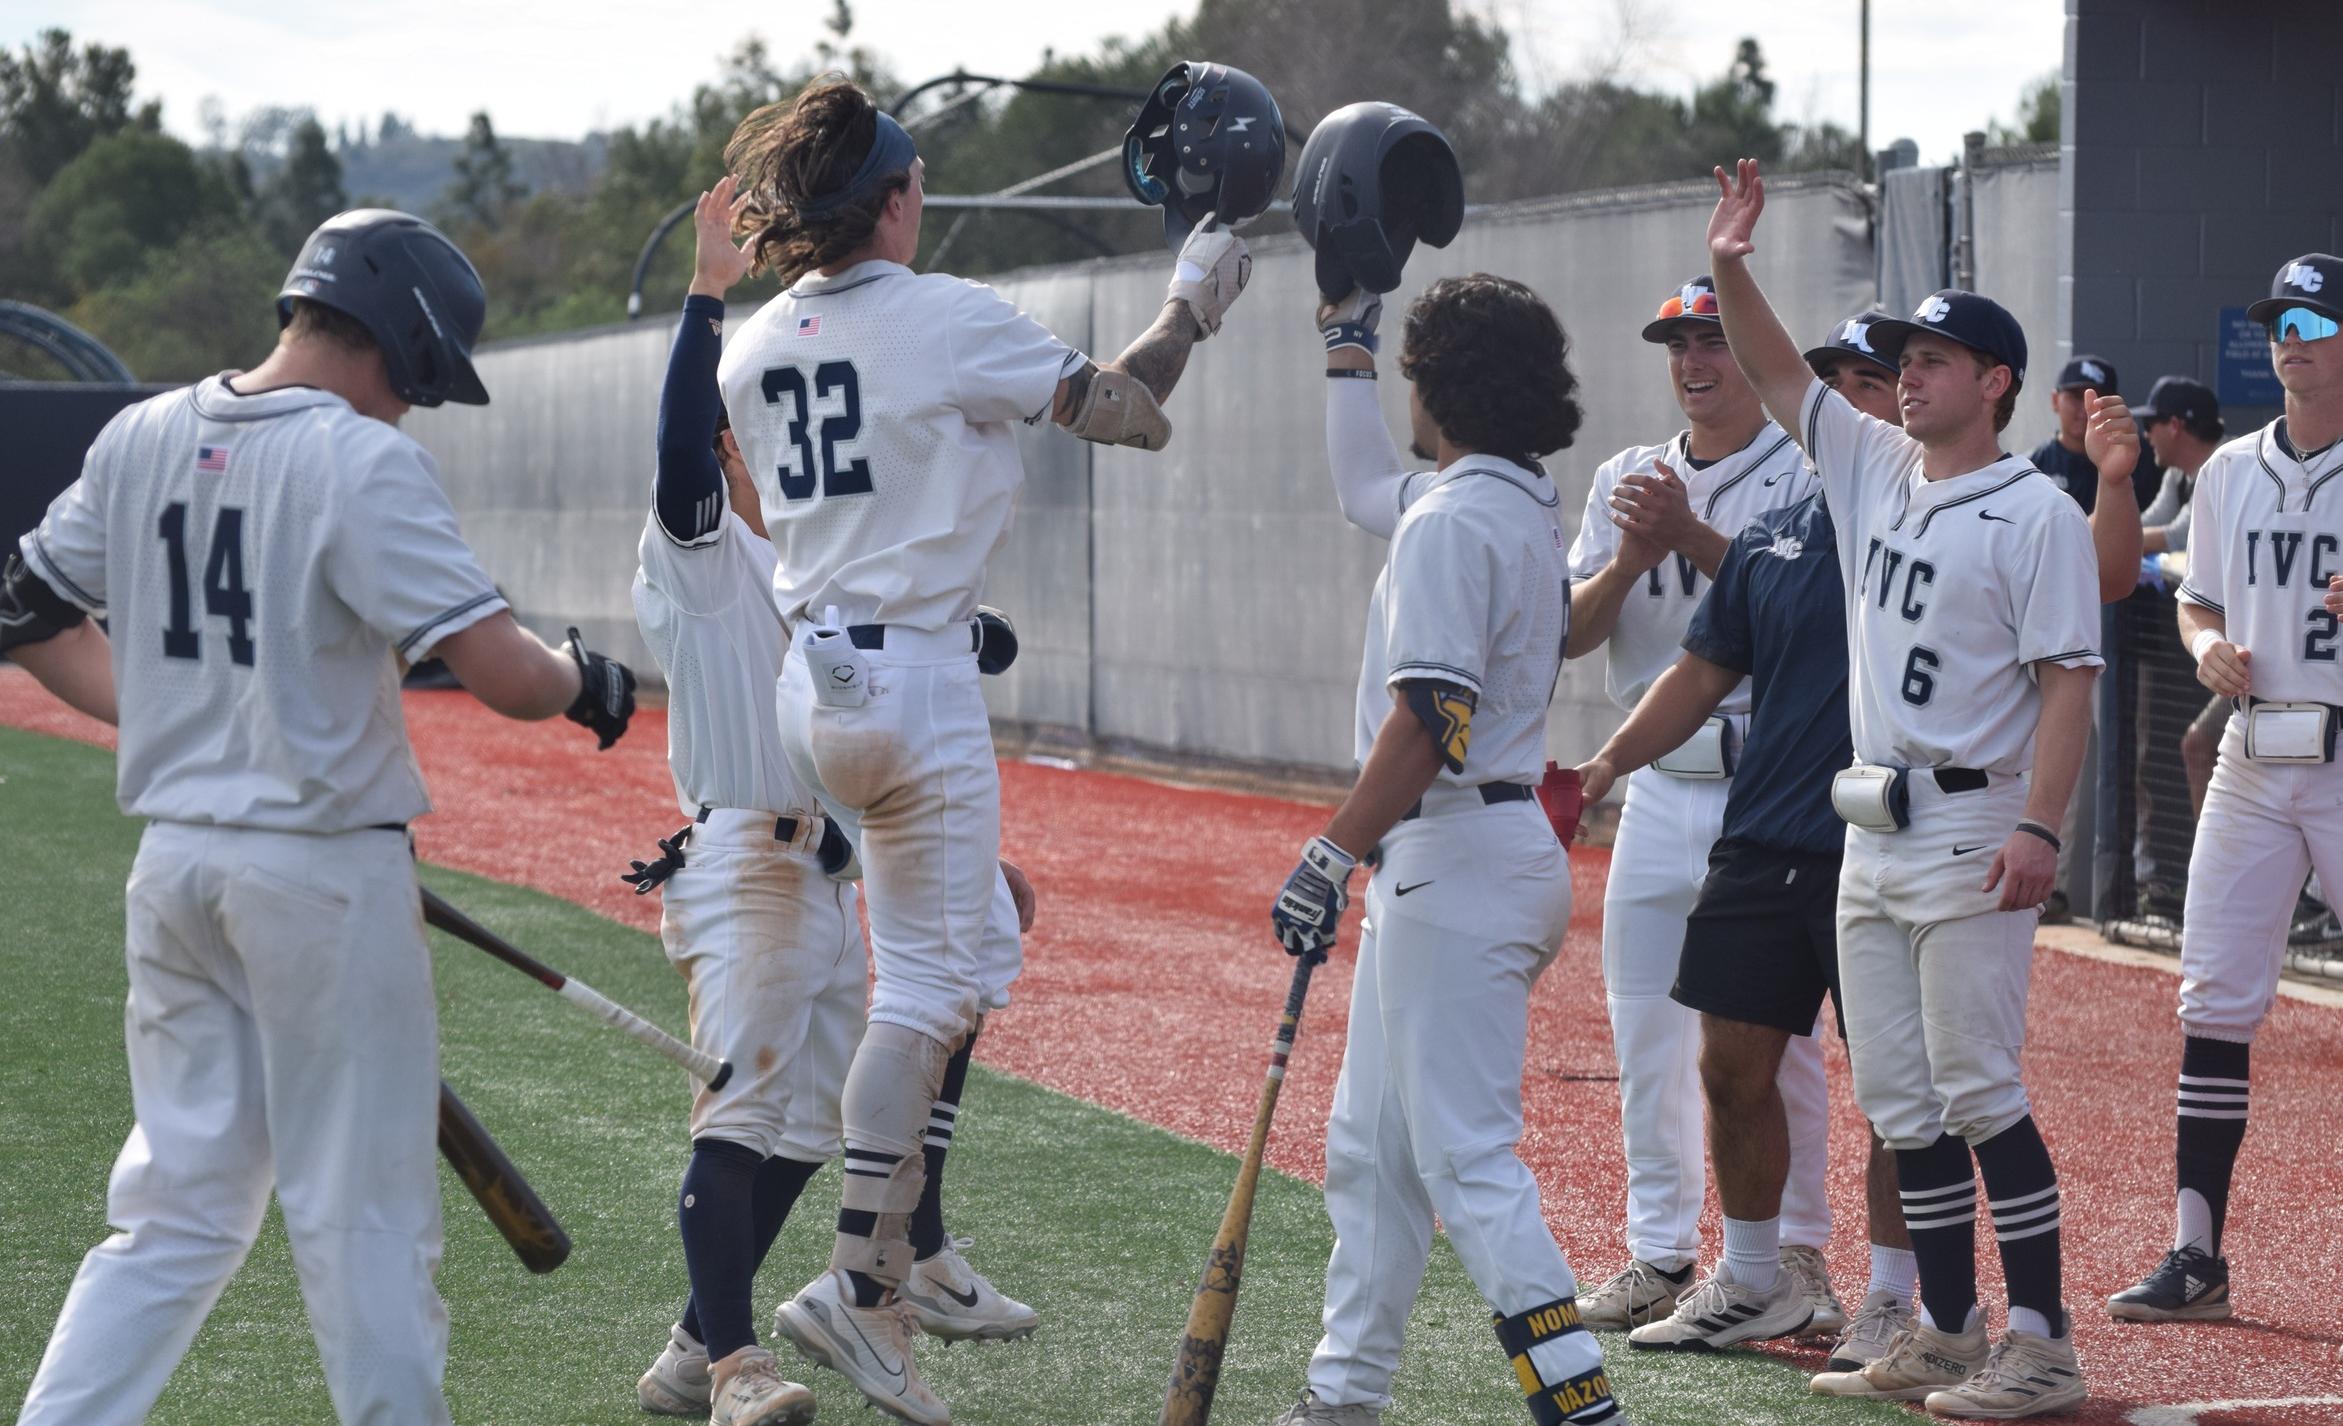 Baseball team scores early and often in 11-0 win over Vikings